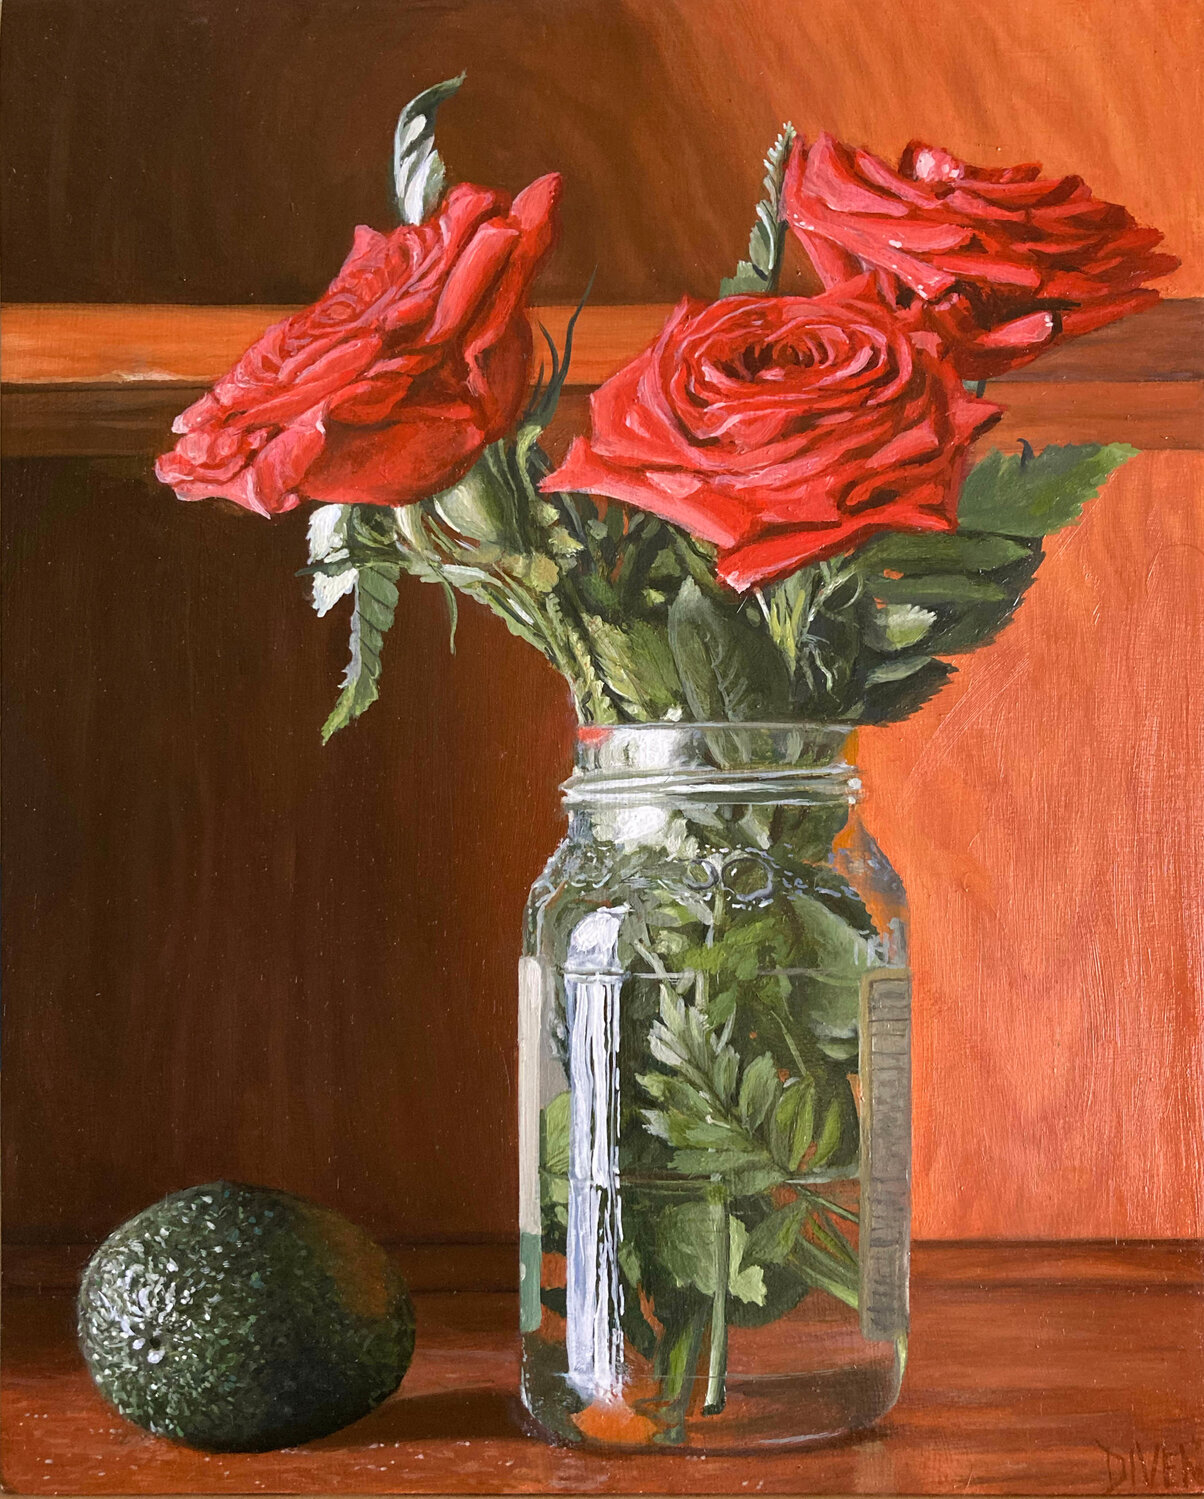 Roses and Avocado, a still life in oil on panel.  2019.  8 x 10 inches.